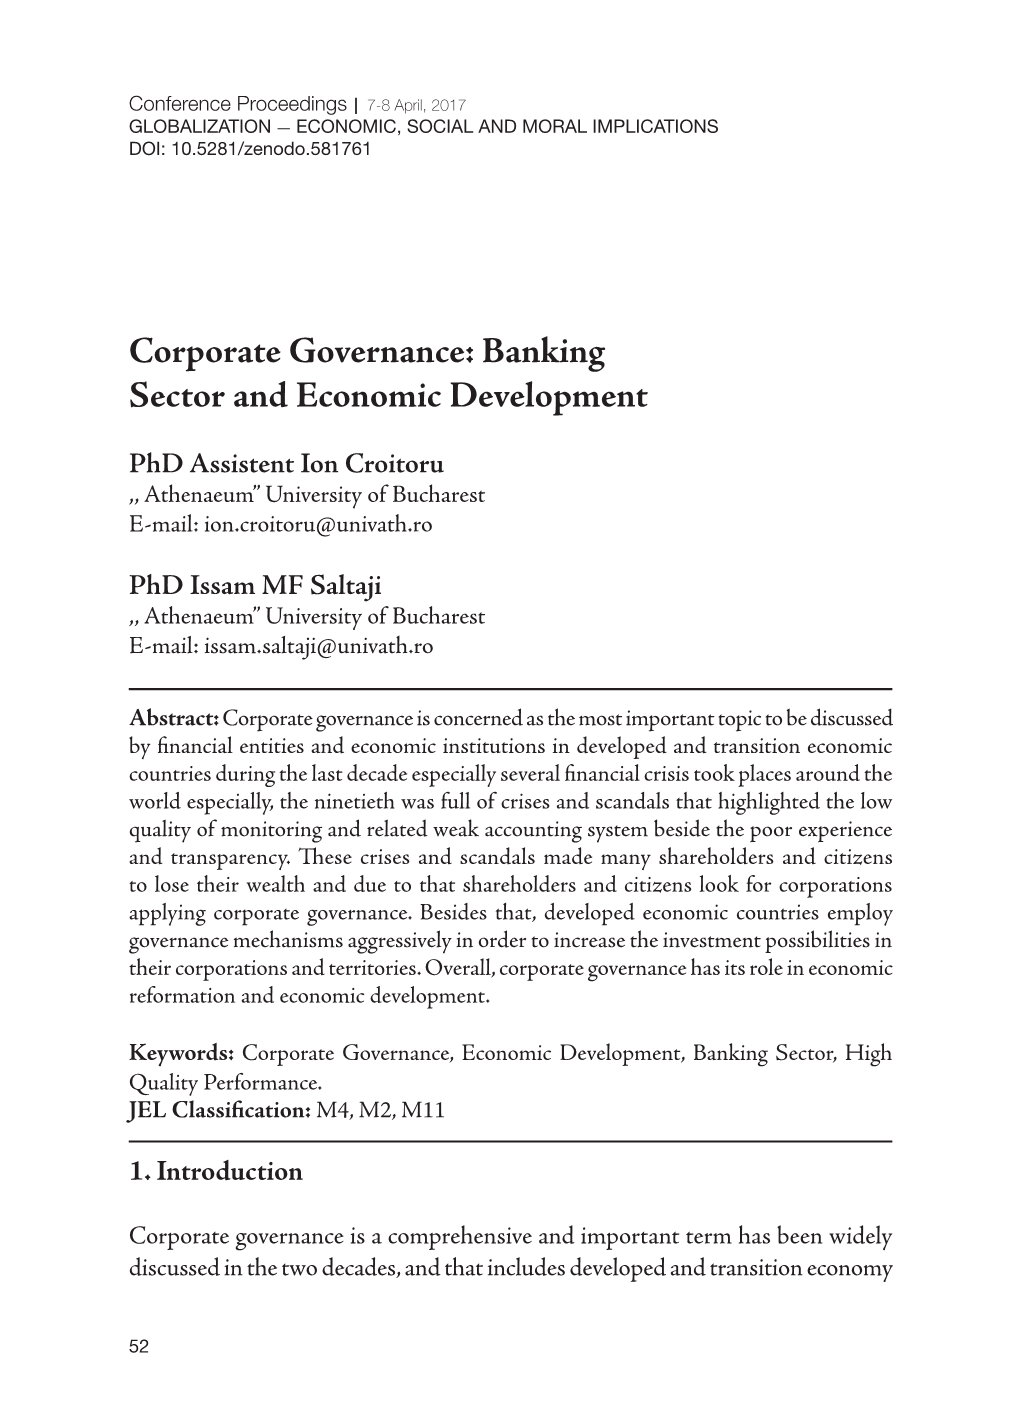 Corporate Governance: Banking Sector and Economic Development